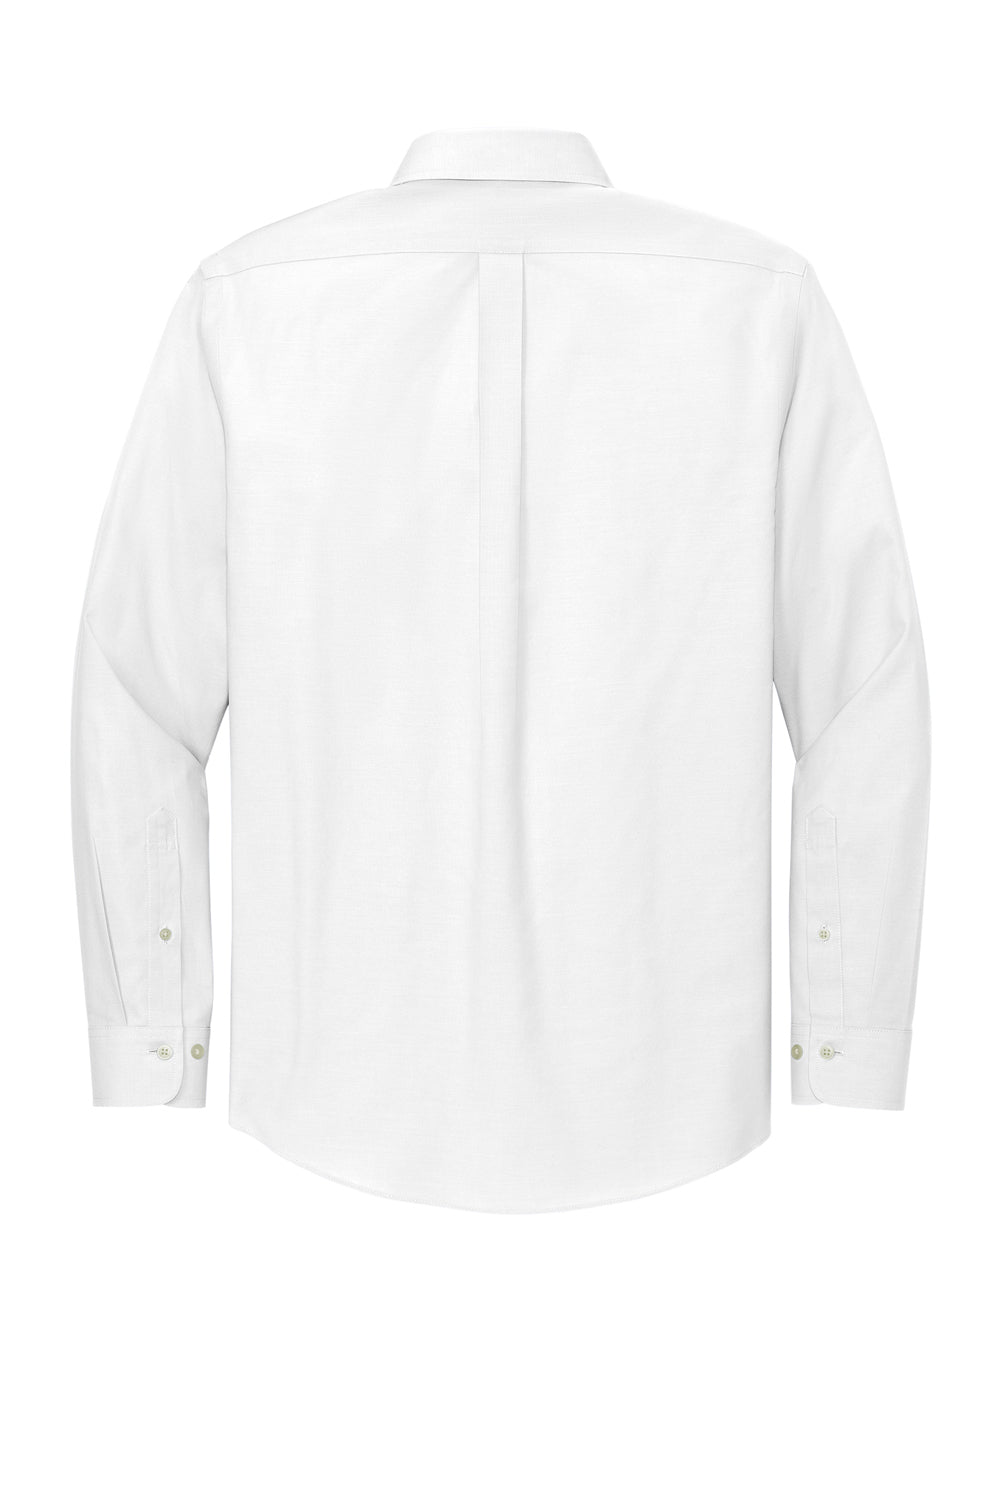 Brooks Brothers Mens Wrinkle Resistant Pinpoint Long Sleeve Button Down Shirt w/ Pocket White Flat Back